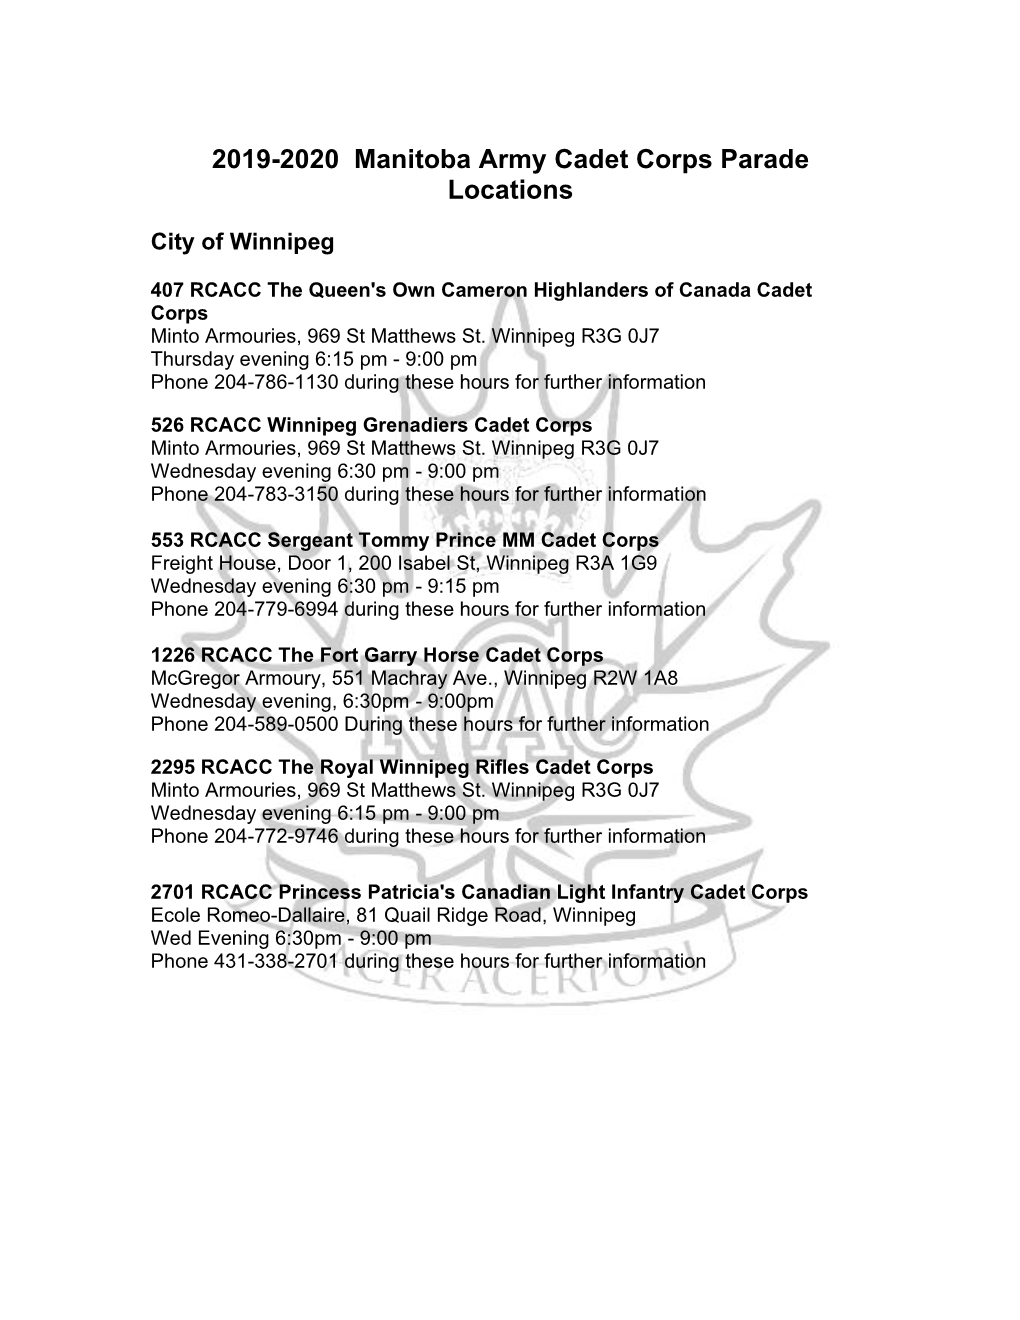 List of Manitoba Army Cadet Corps